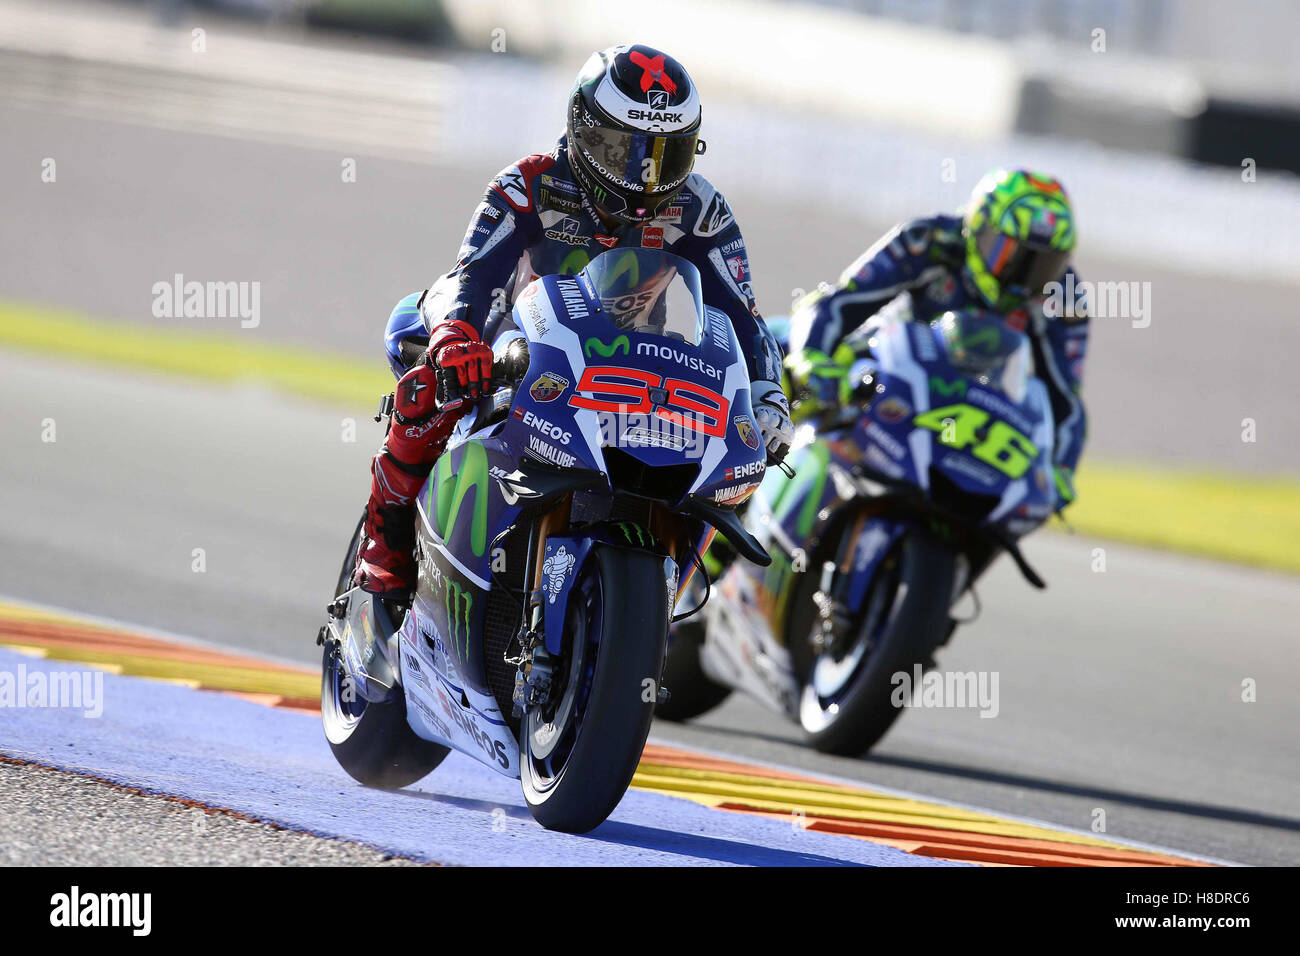 Valencia, Spain. 11th November, 2016. Jorge Lorenzo (99) of Spain and  Movistar Yamaha MotoGP and Valentino Rossi (46) of Italy and Yamaha MotoGP  in action during the Free Practice during the MotoGP